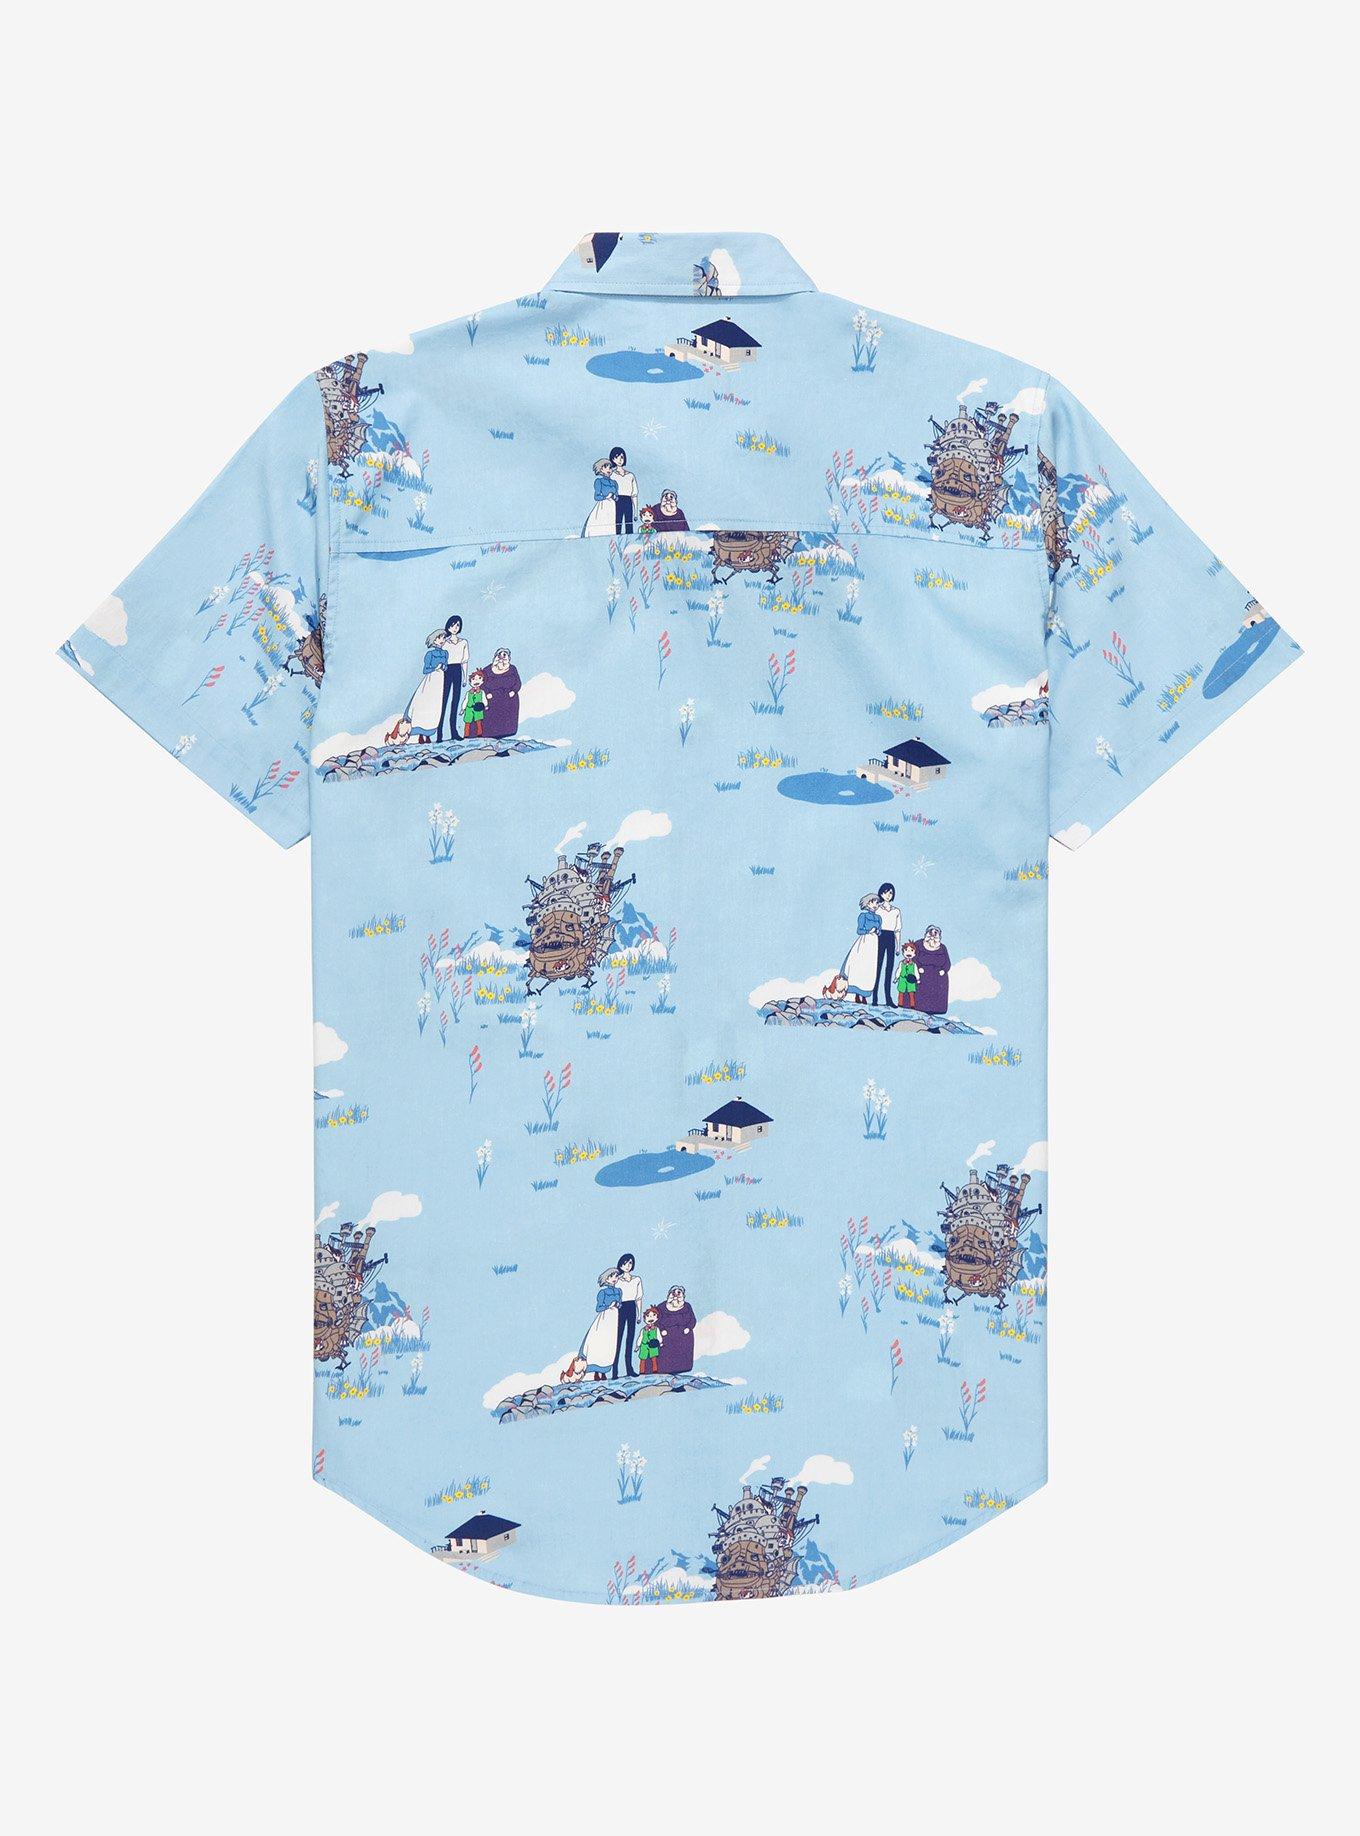 Studio Ghibli Howl’s Moving Castle Scenic Woven Button-Up - BoxLunch Exclusive , LIGHT BLUE, alternate